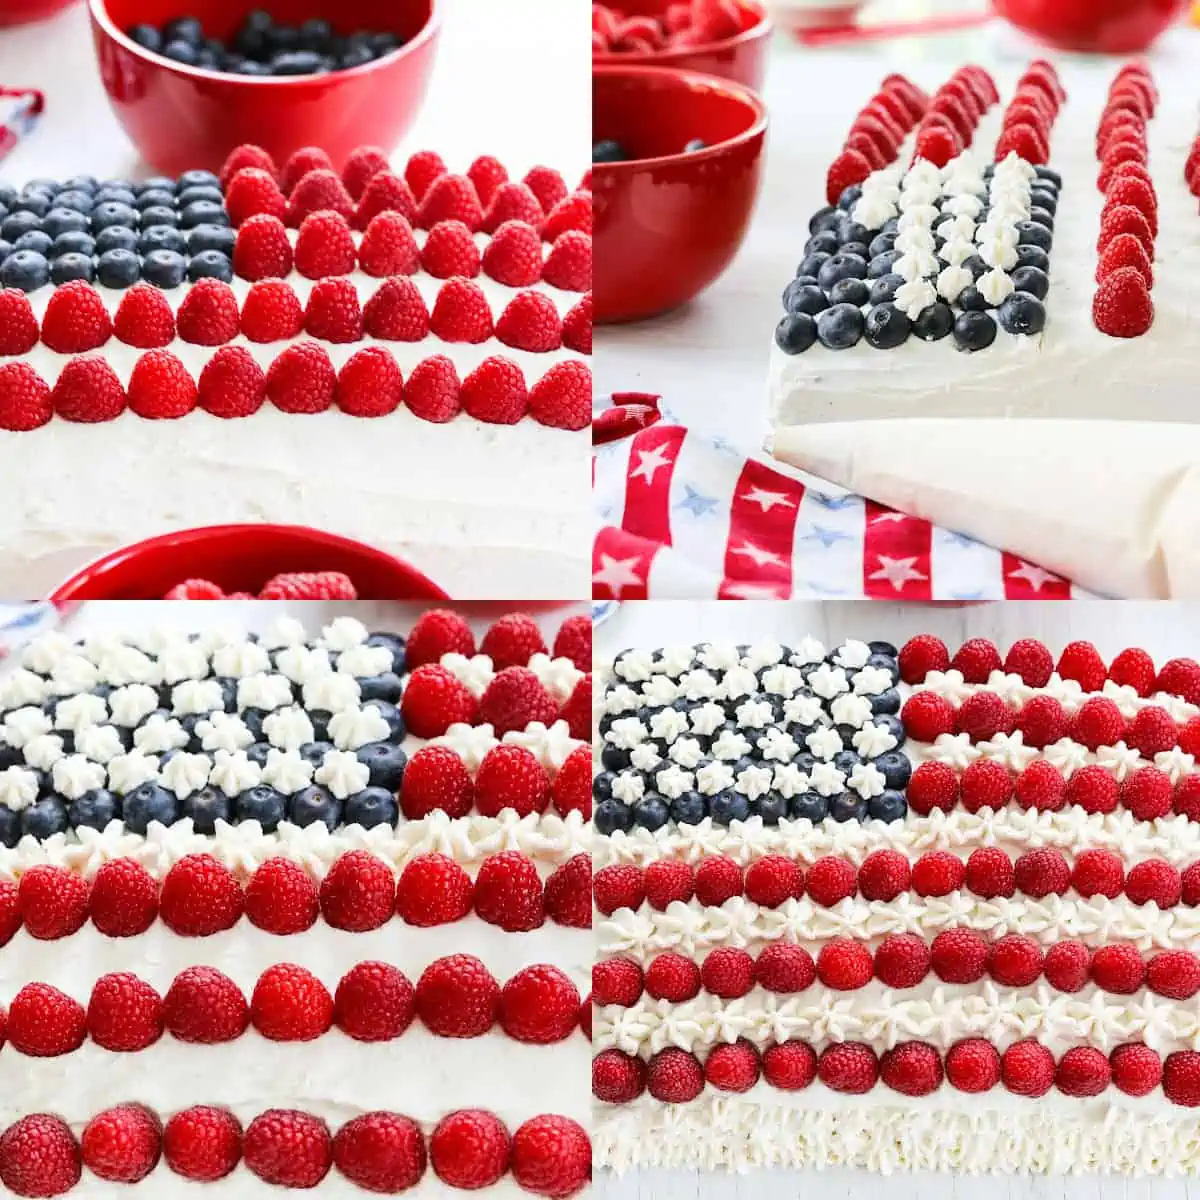 Showing how to decorate a flag cake with white frosting, raspberries, and blueberries for Fourth of July.